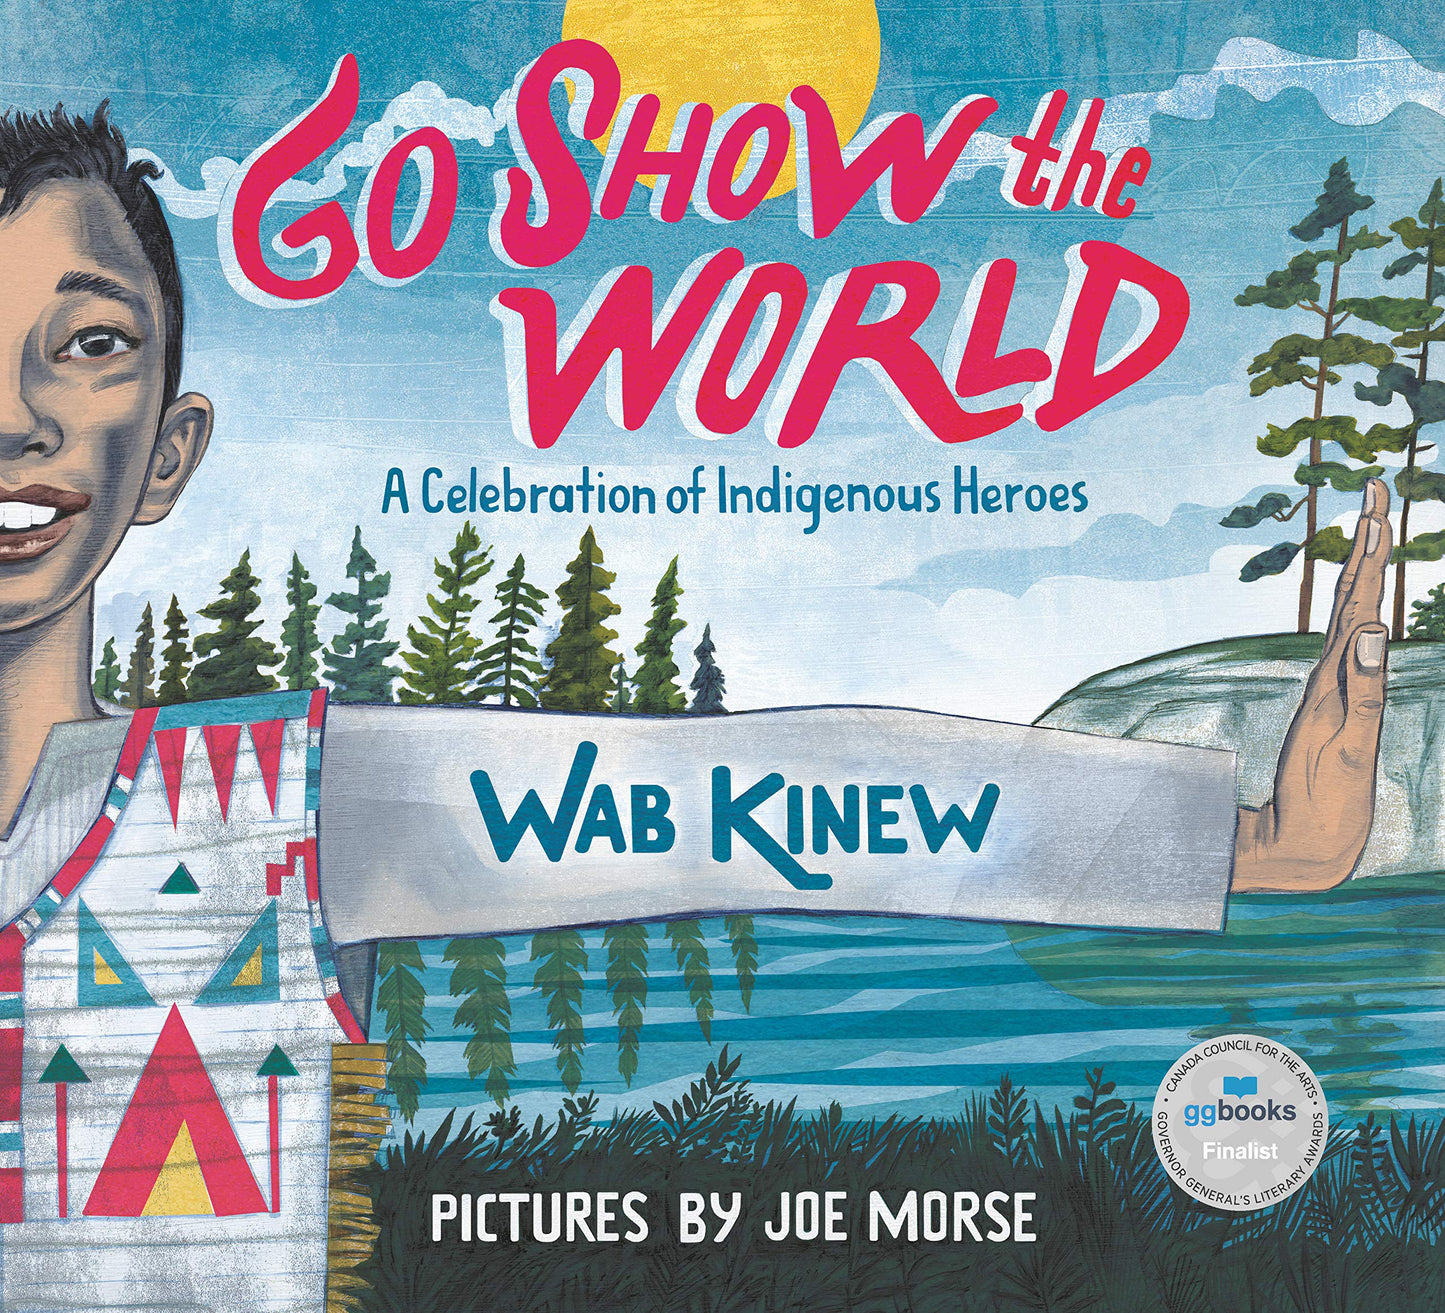 Go Show the World A Celebration of Indigenous Heroes